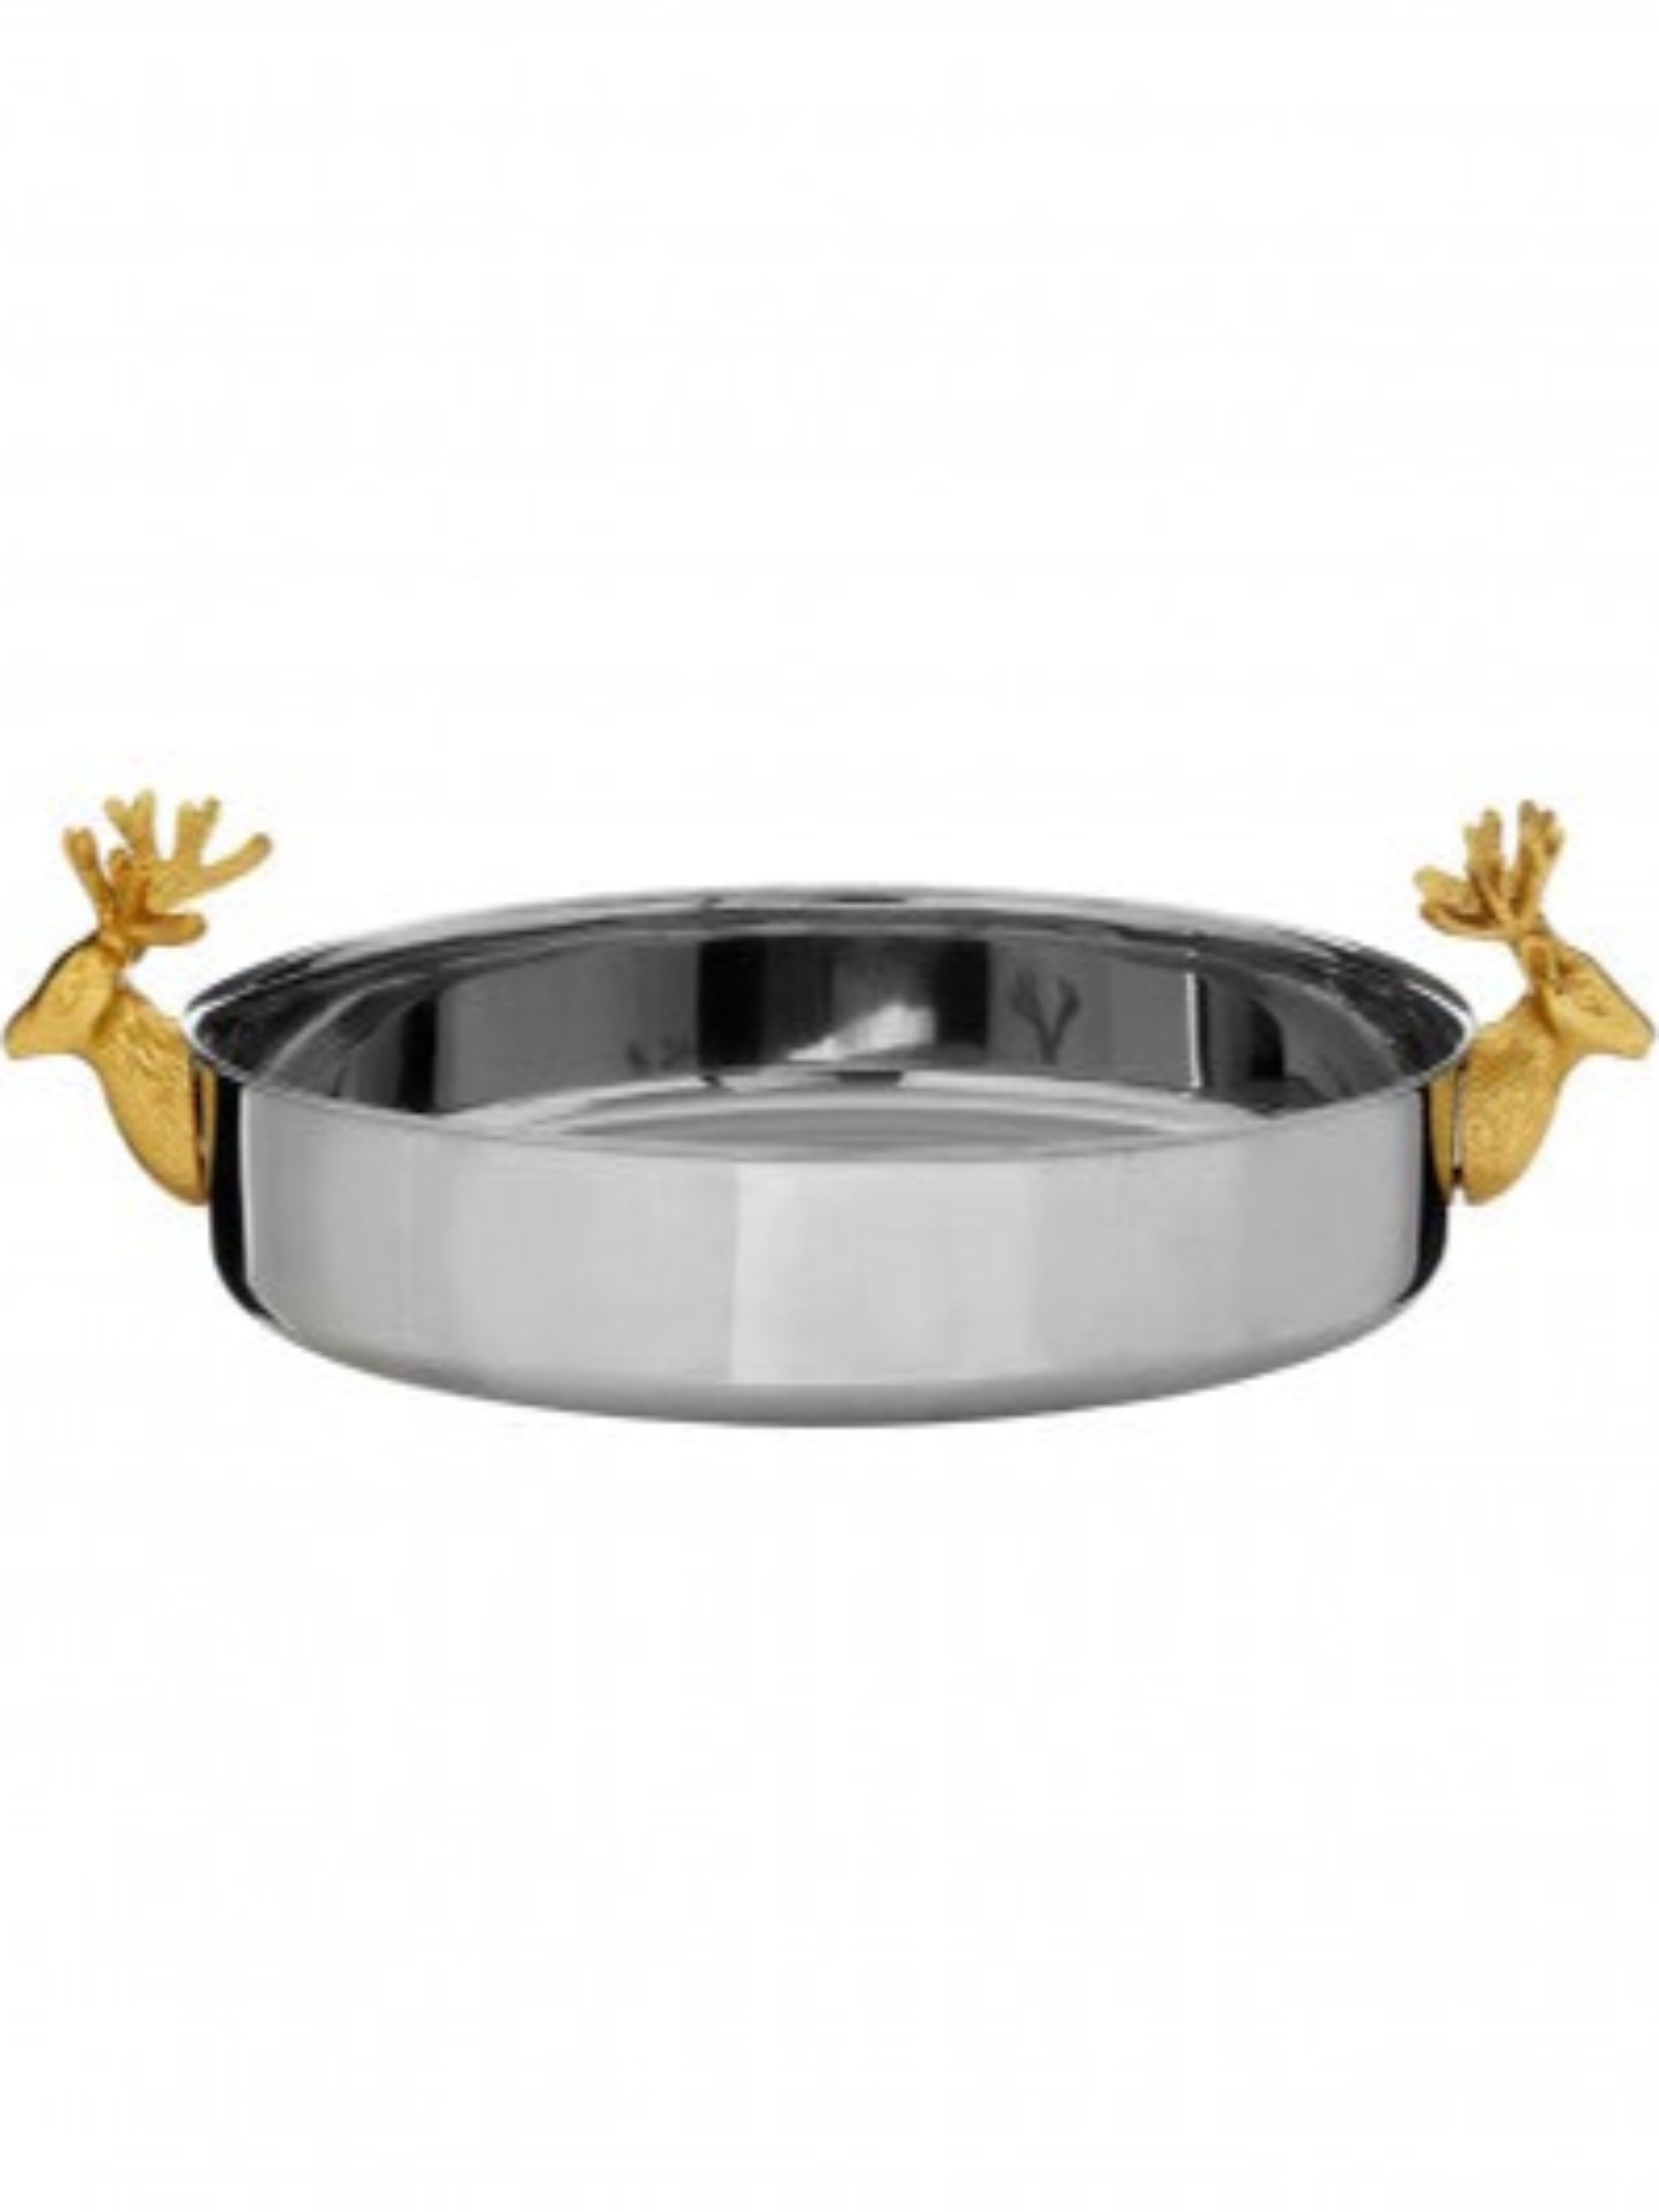 Silver Mirrored Tray with Gold Stag Head Detail